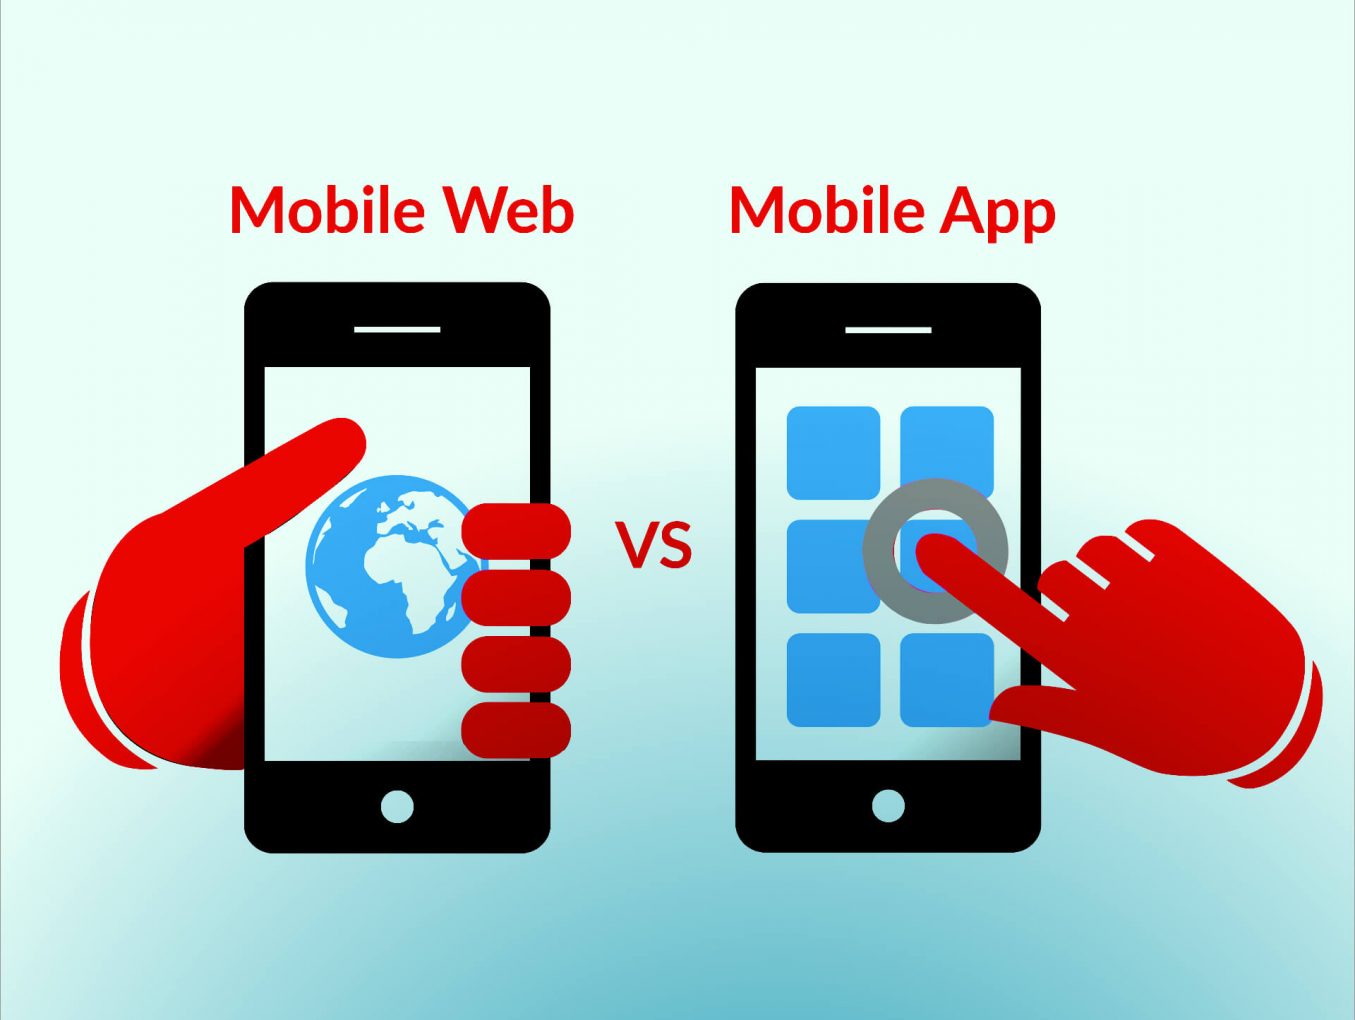 Mobile website or mobile application. What is better for me?